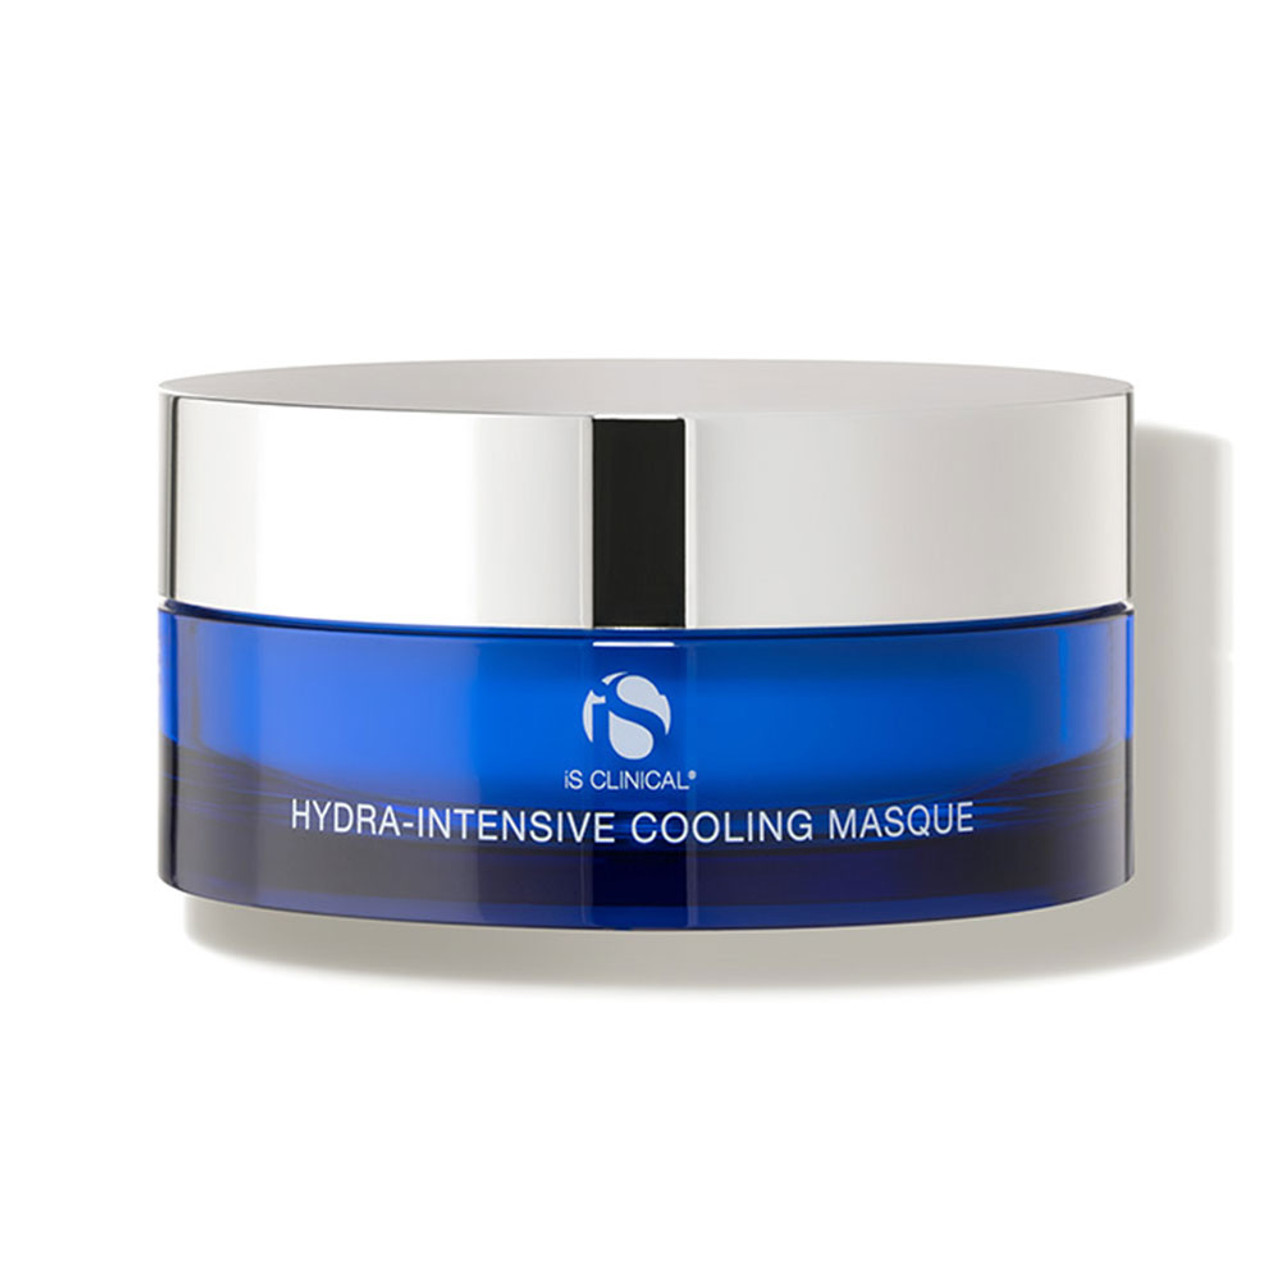 iS Clinical Hydra-Intensive Cooling Masque BeautifiedYou.com